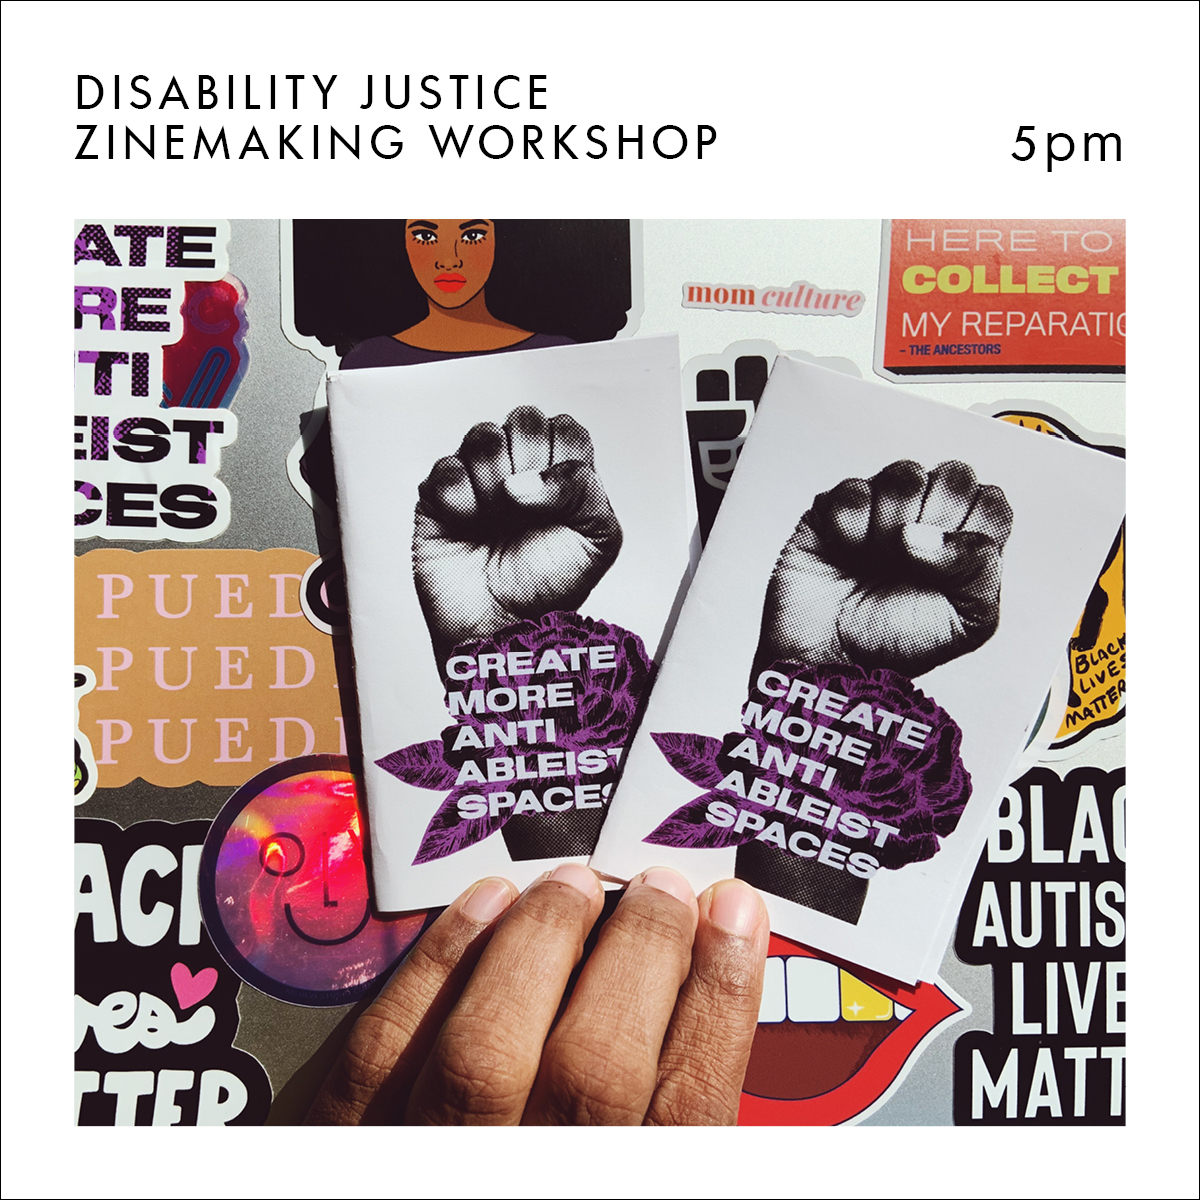 Announcement promotion for an event featuring a clenched fist on the cover of a homemade magazine. Text reads Disability Justice Zinemaking Workshop 5pm.